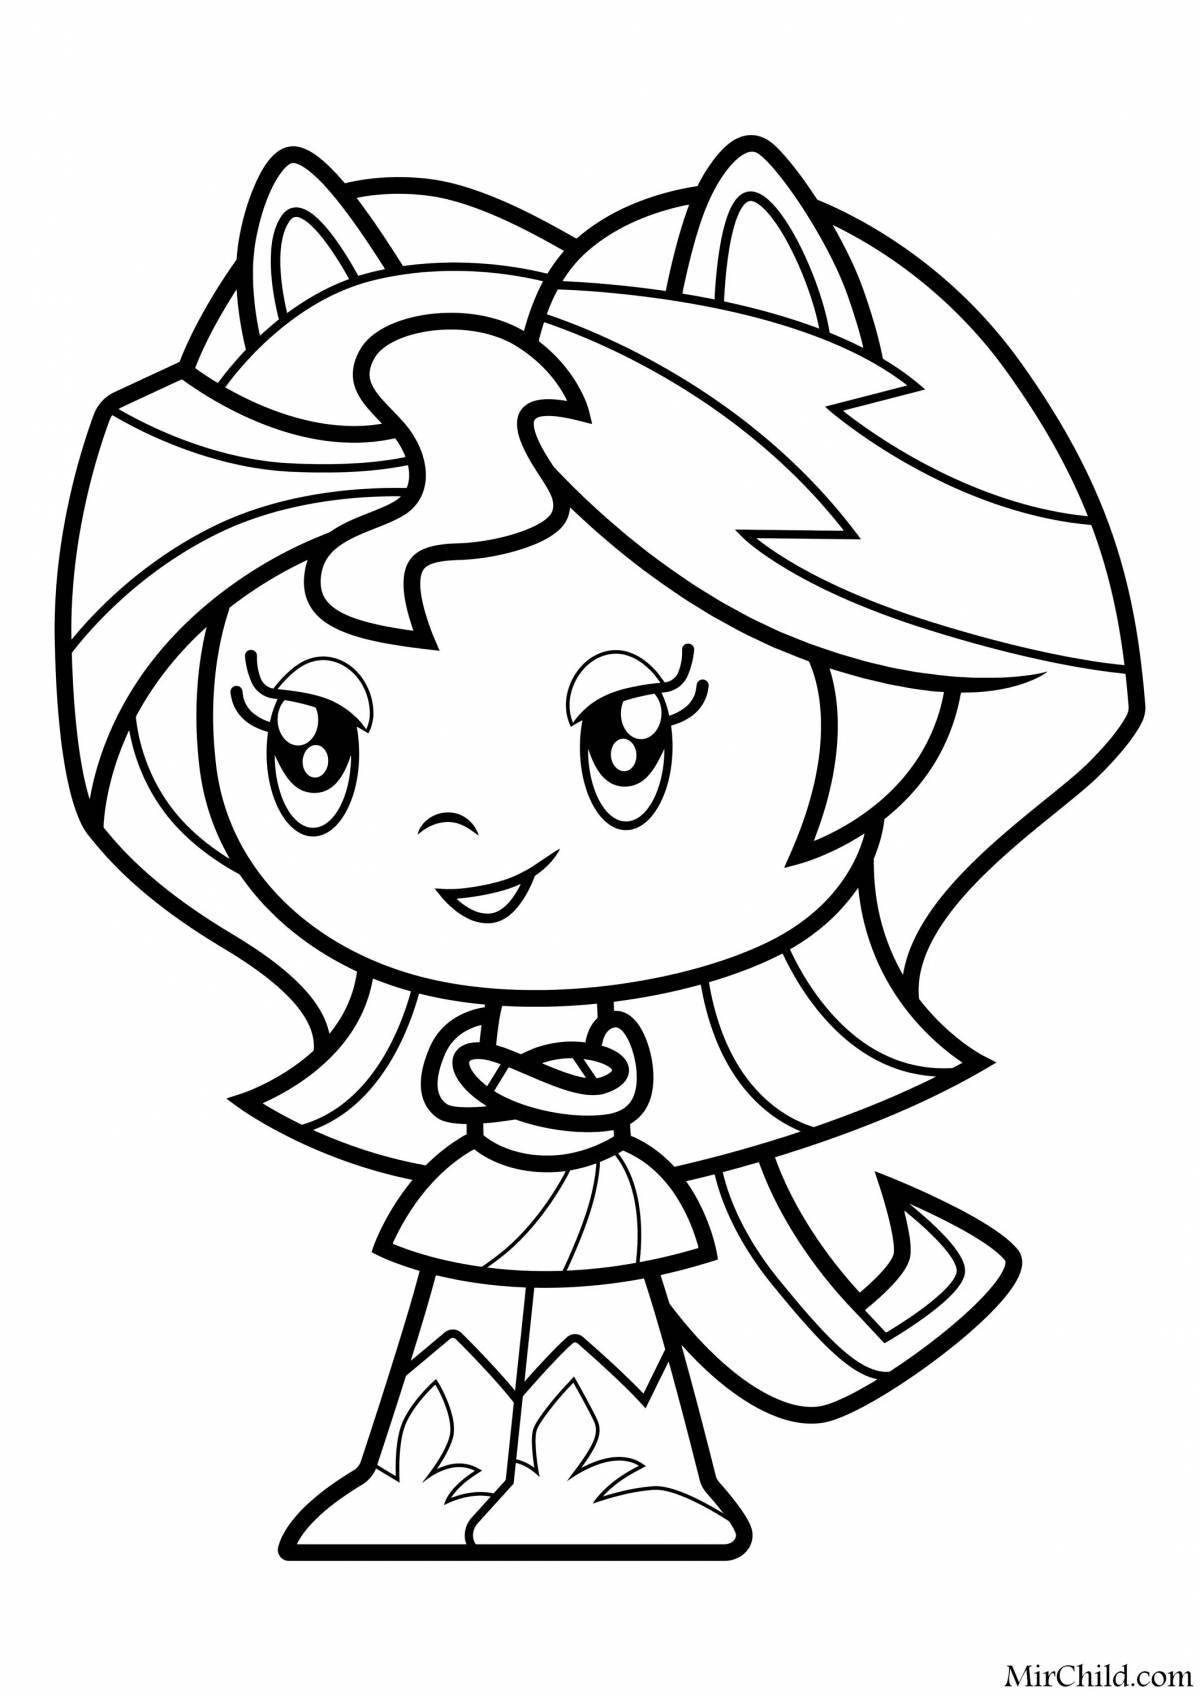 Coloring fabulous sunset shimmer